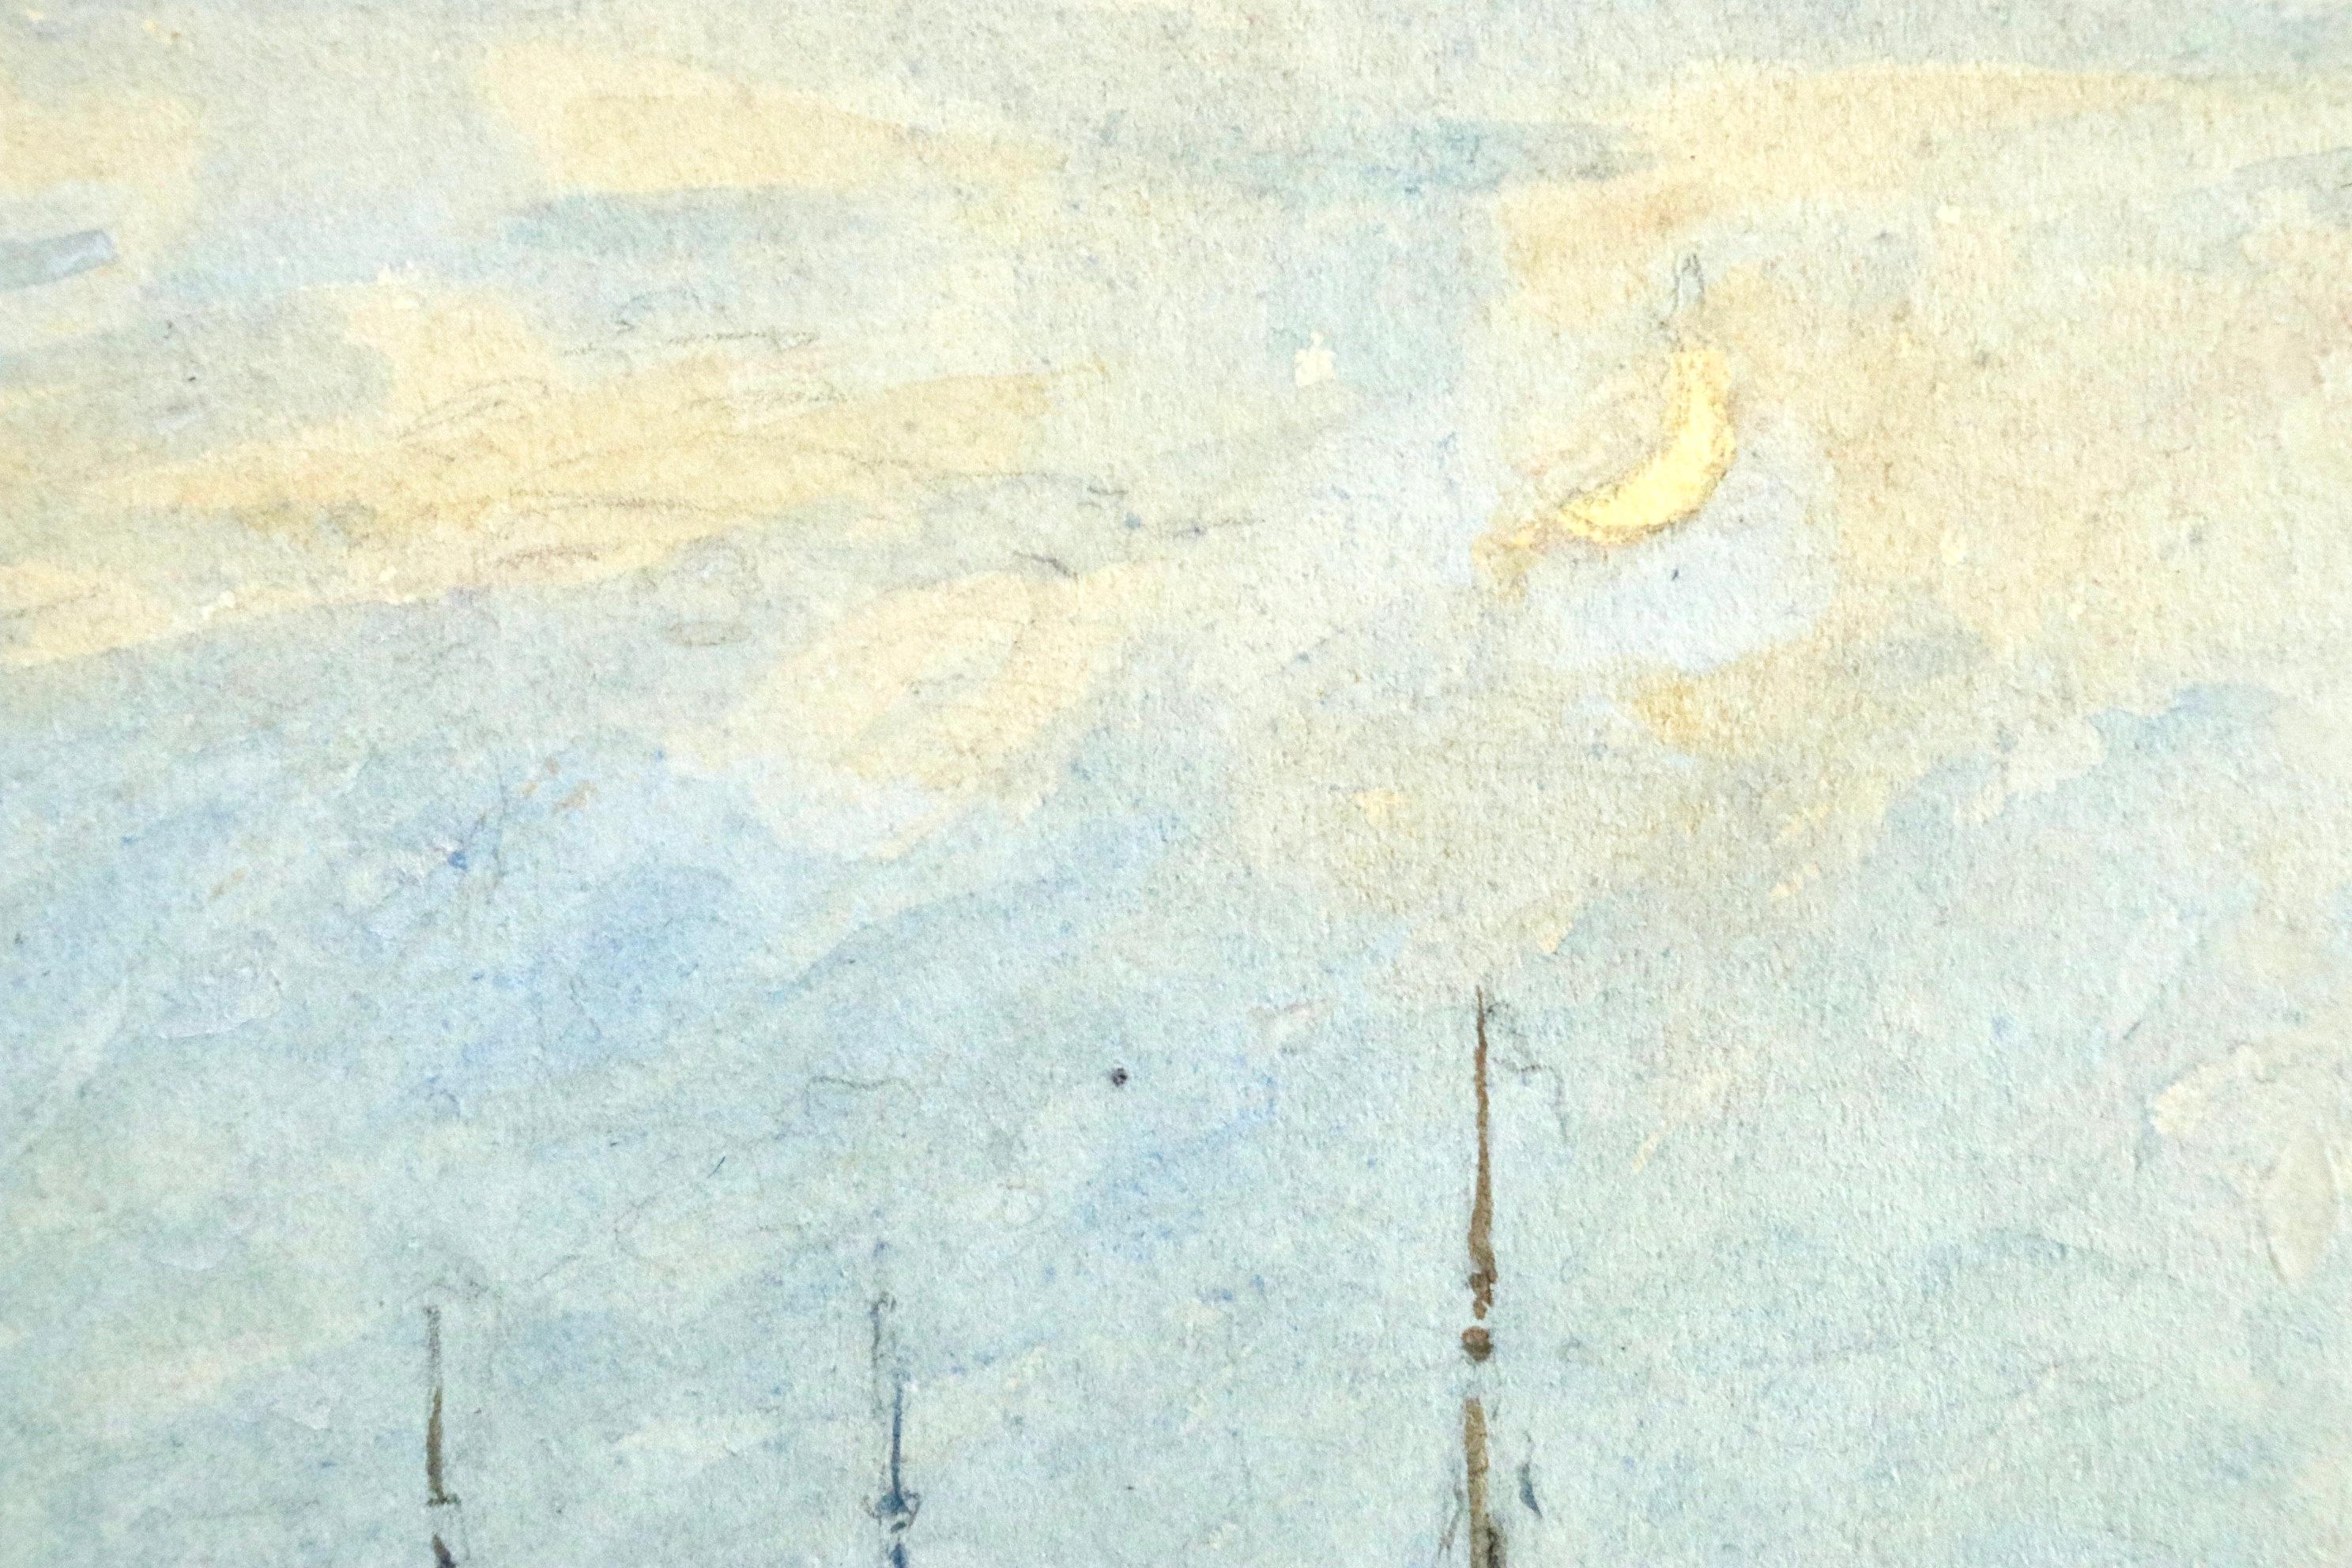 Watercolour on paper circa 1910 by Henri Duhem depicting figures on boats on the river, with a crescent moon in the sky. Signed lower left. This painting is not currently framed but a suitable frame can be sourced if required.

Descendant of an old